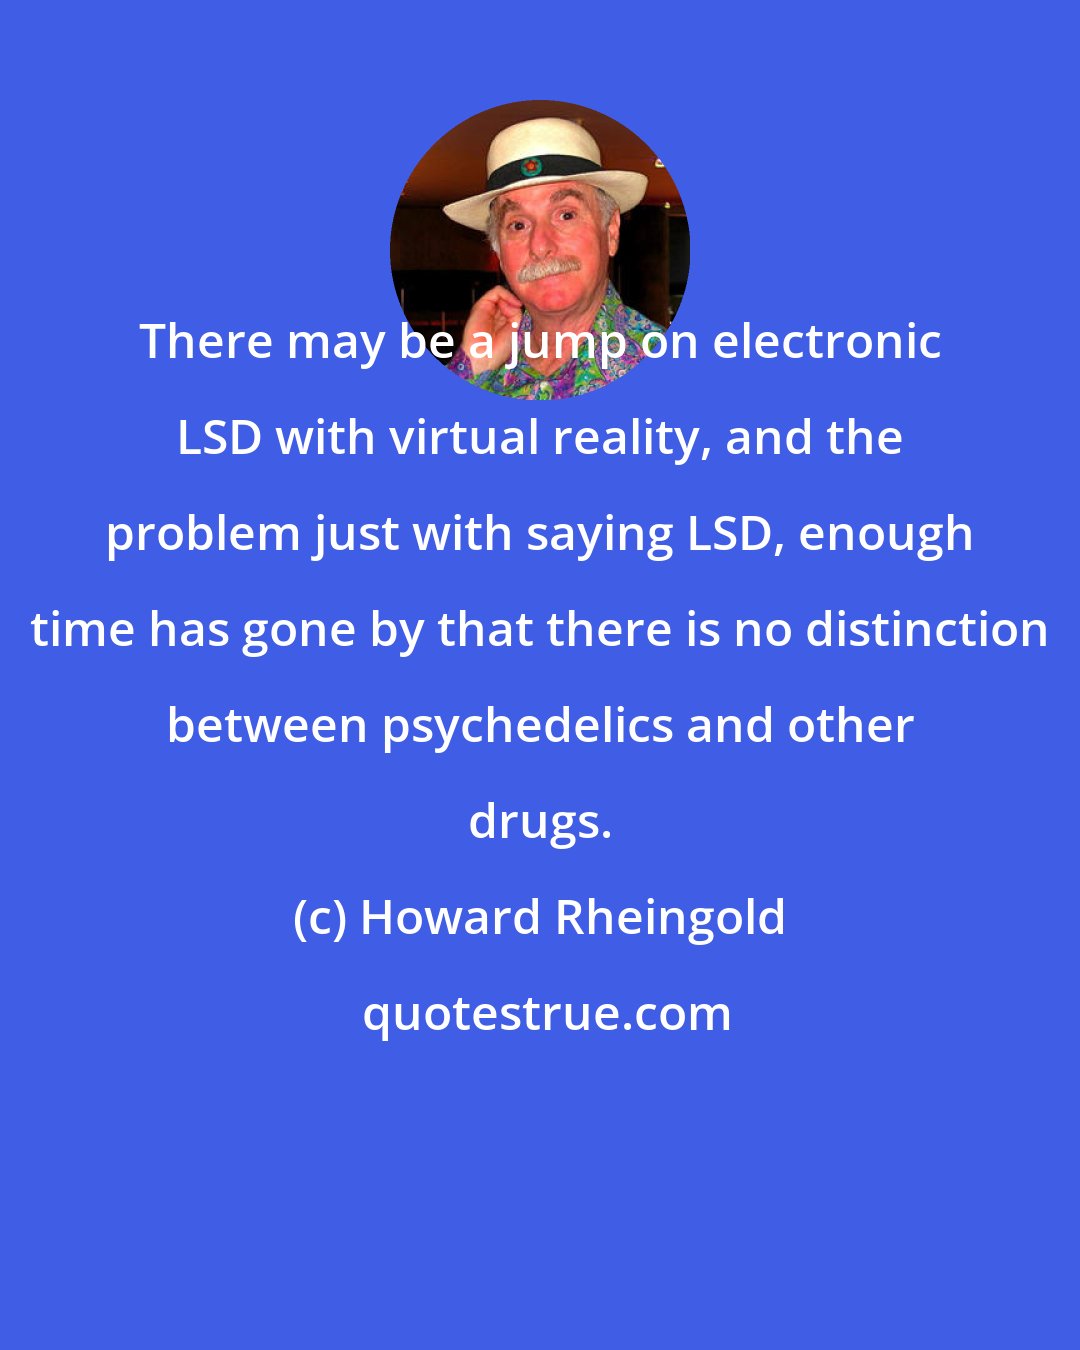 Howard Rheingold: There may be a jump on electronic LSD with virtual reality, and the problem just with saying LSD, enough time has gone by that there is no distinction between psychedelics and other drugs.